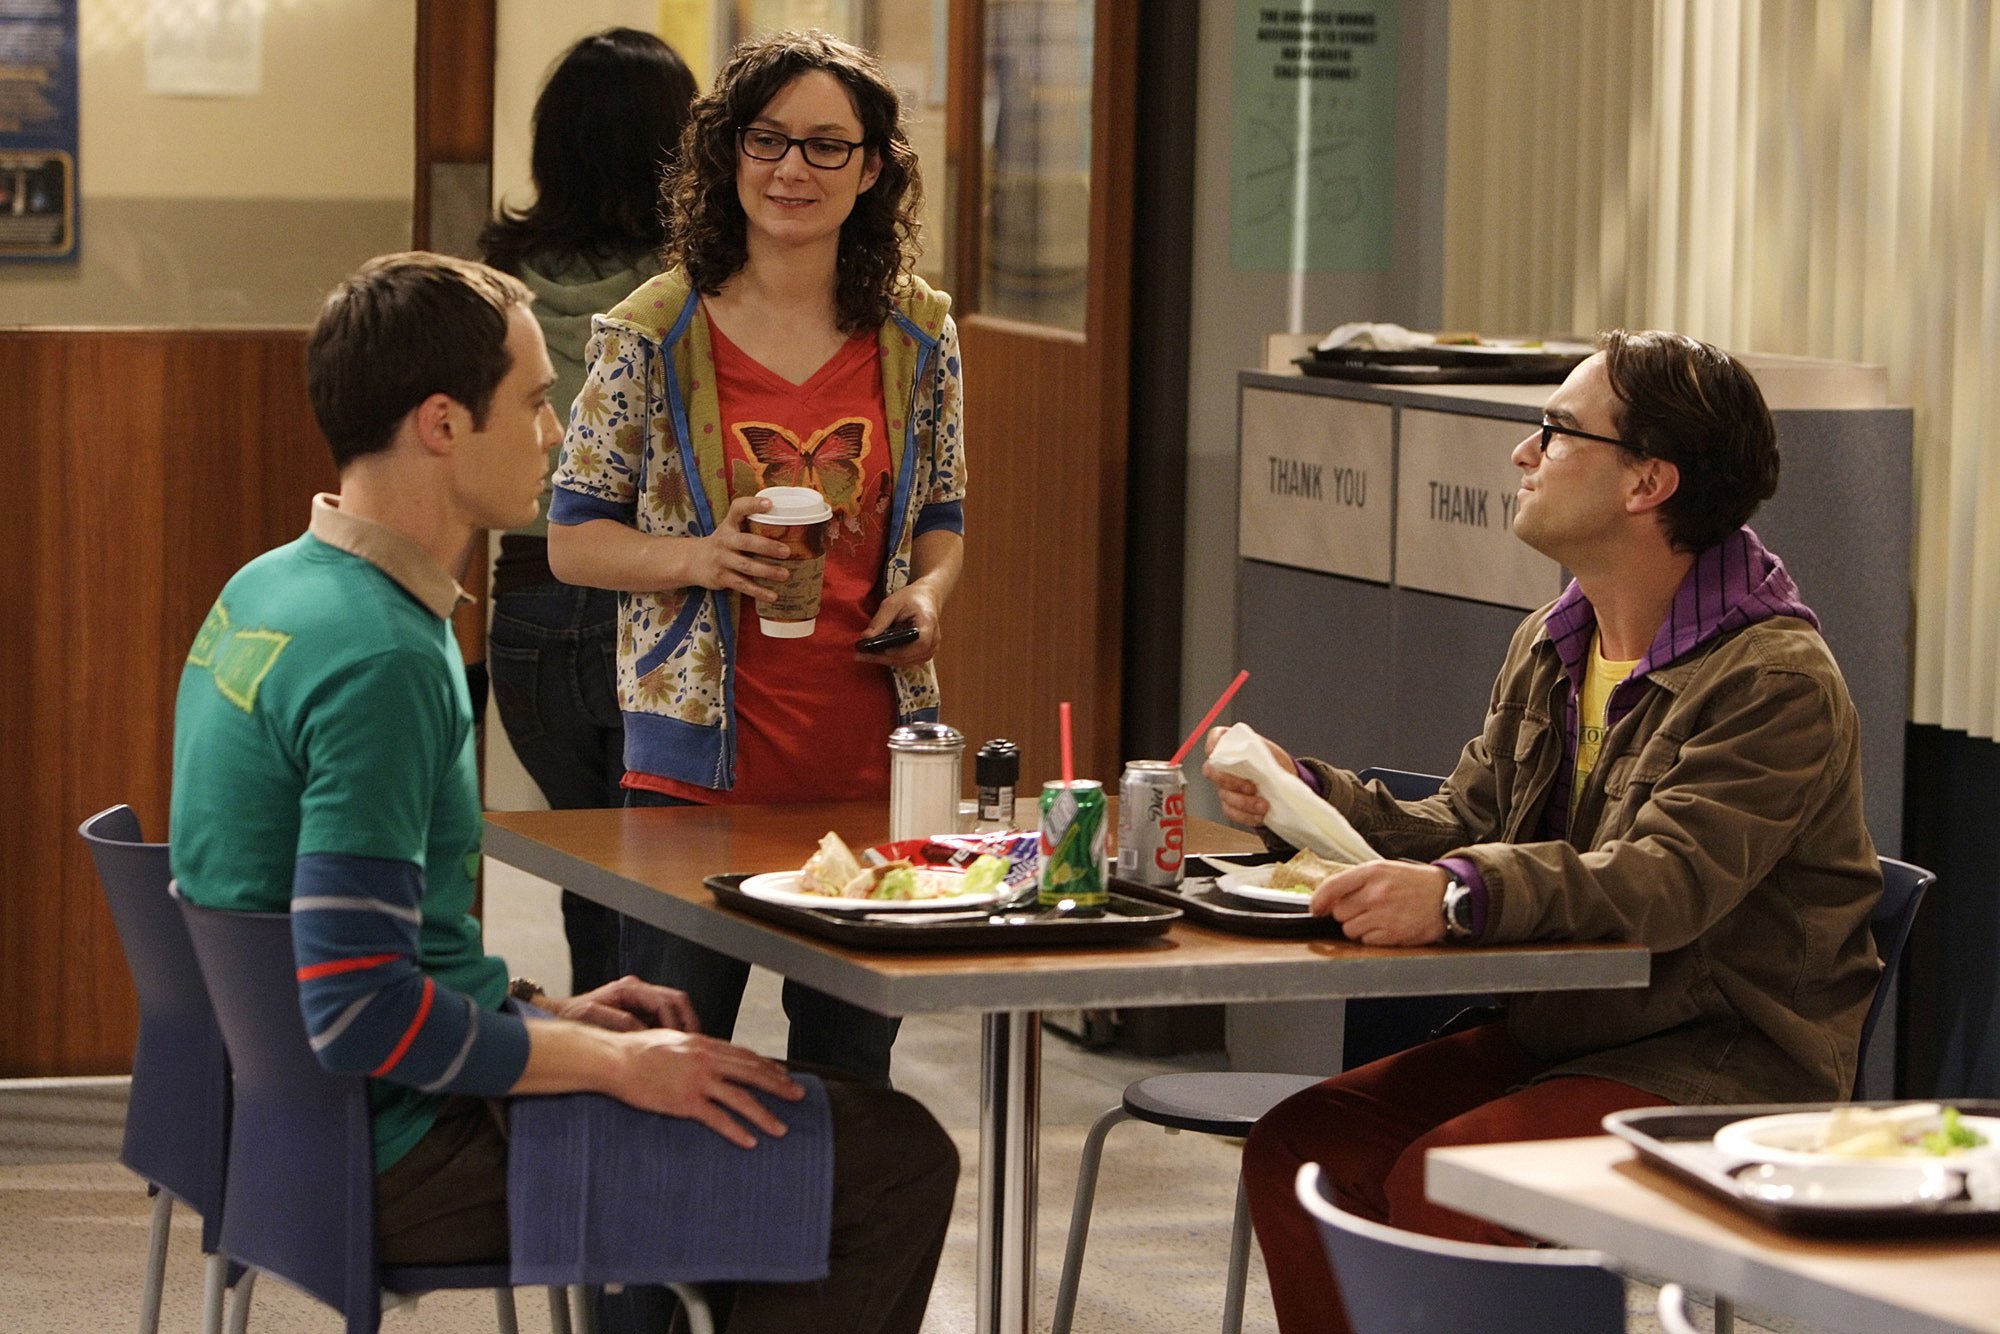 Sheldon Cooper and Leonard Hofstadter have lunch at Caltech. Leslie Winkle stands next ot their table